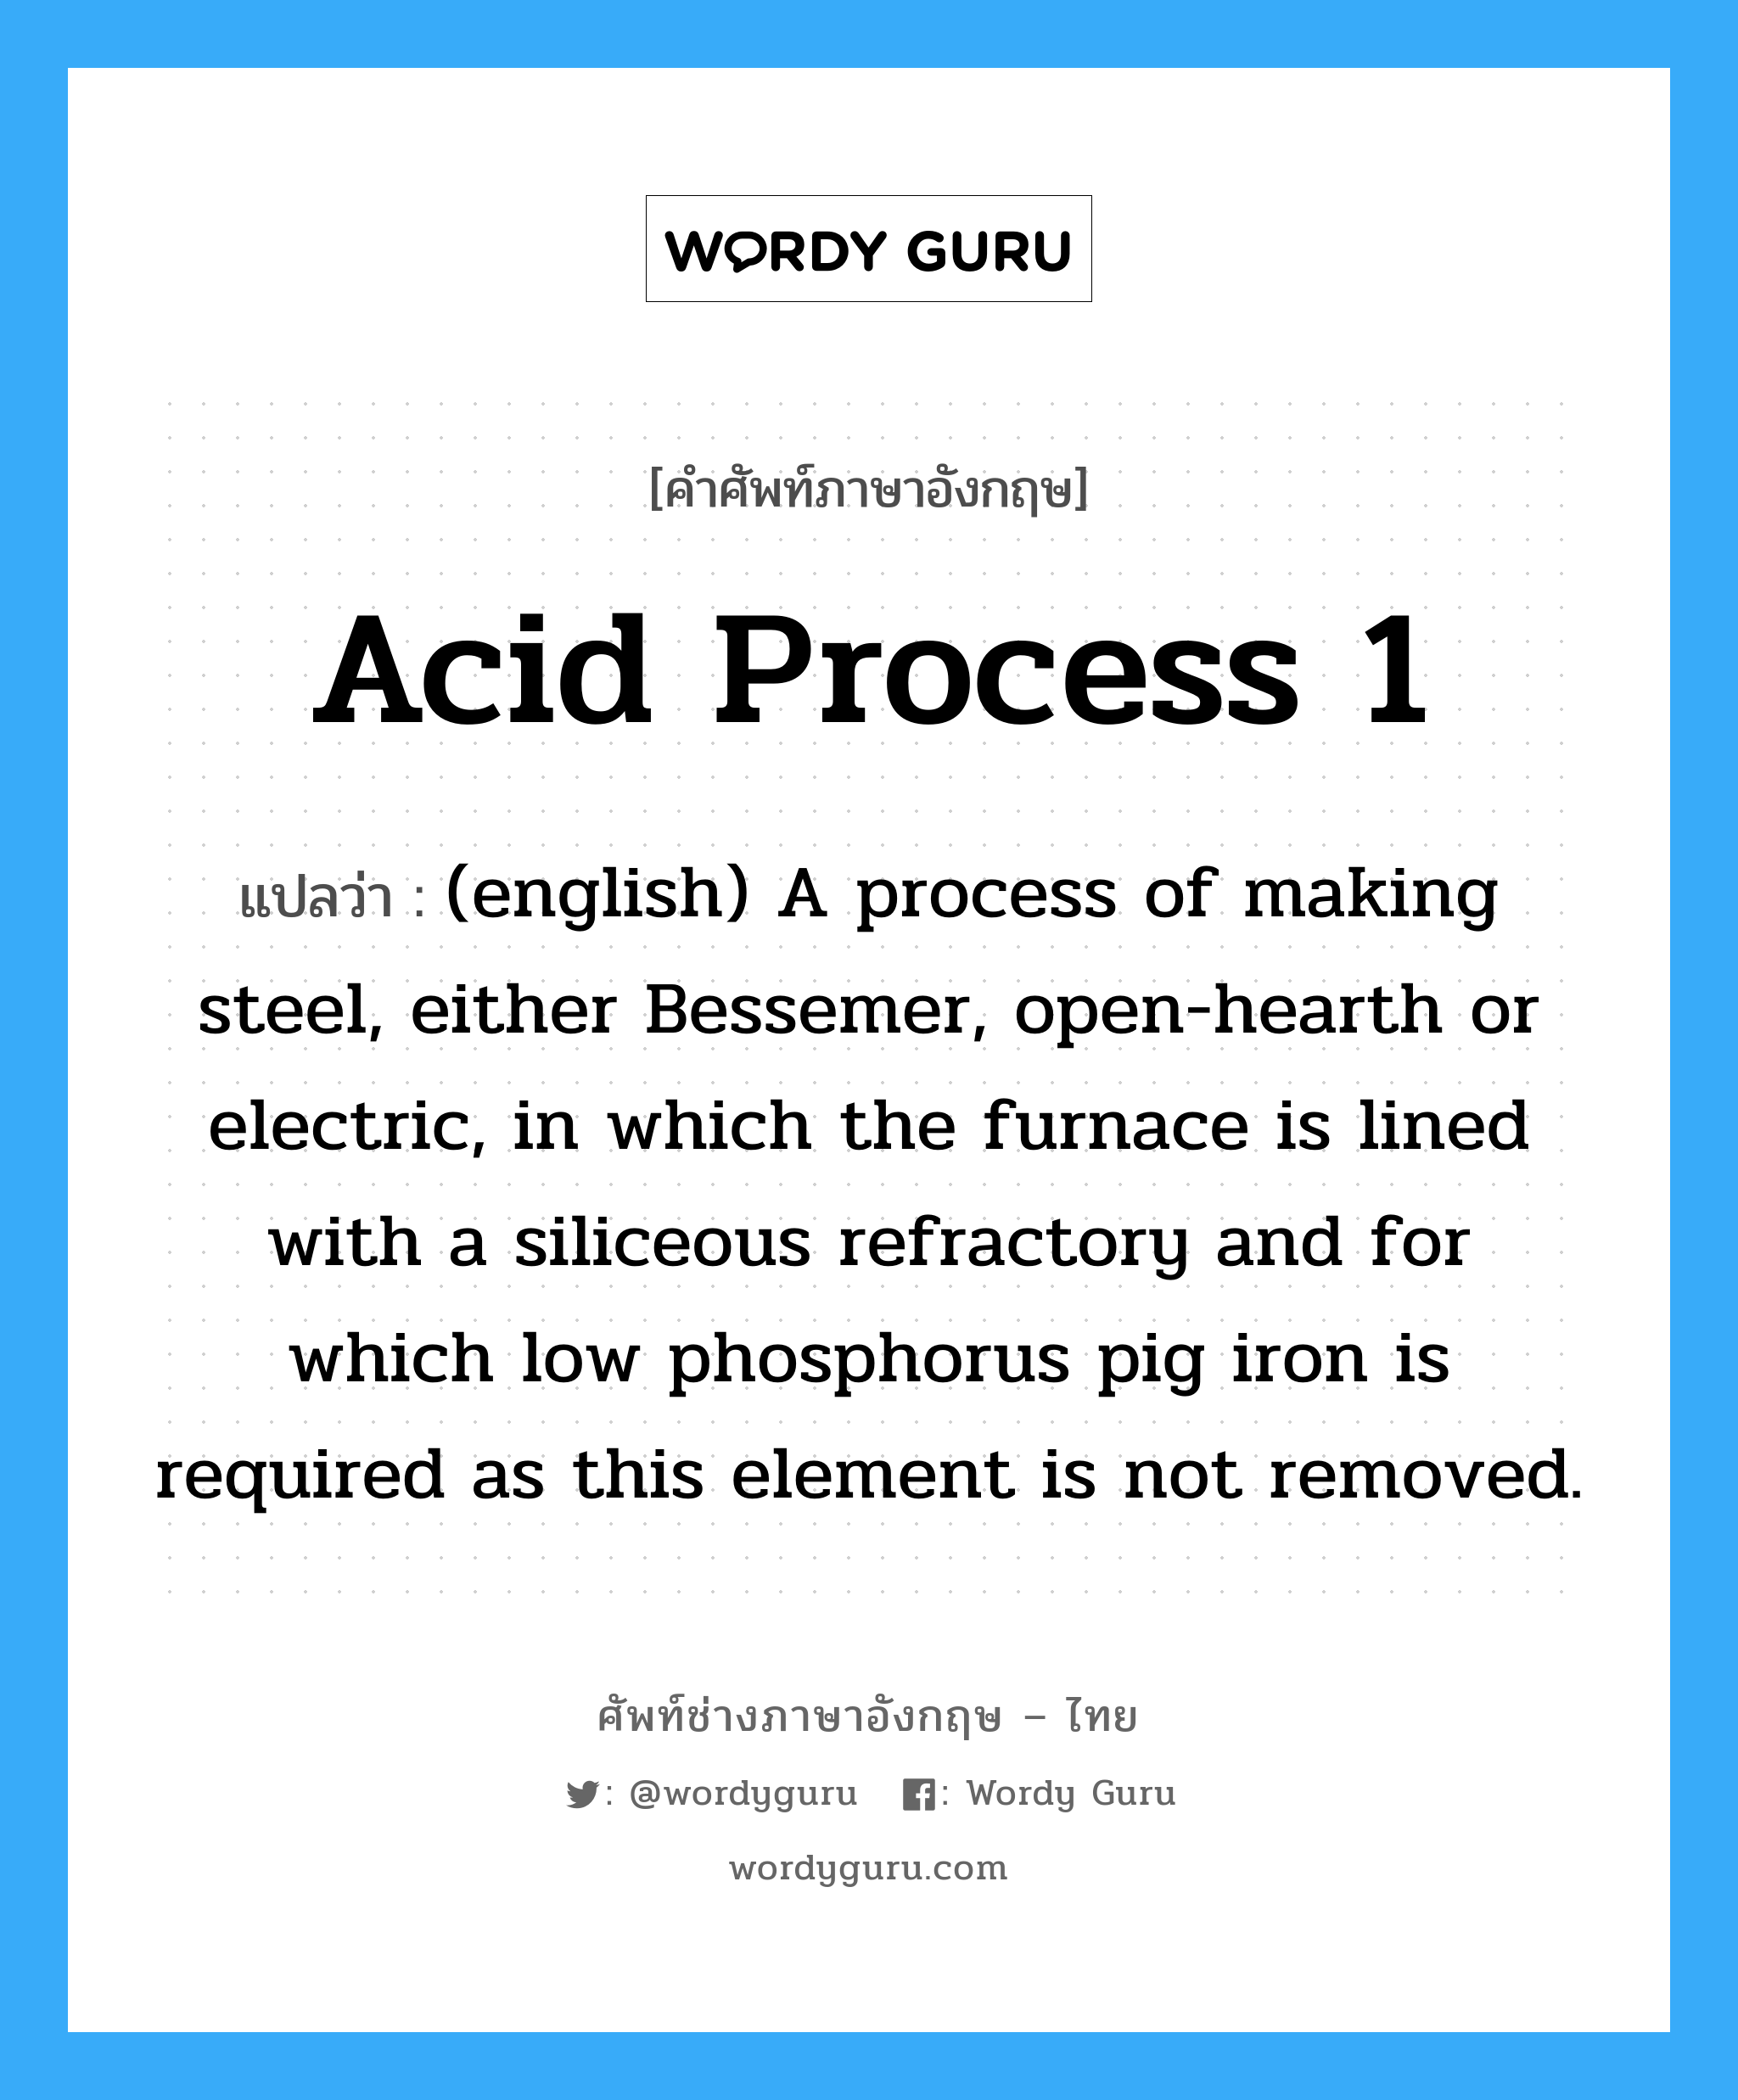 Acid Process 1 แปลว่า?, คำศัพท์ช่างภาษาอังกฤษ - ไทย Acid Process 1 คำศัพท์ภาษาอังกฤษ Acid Process 1 แปลว่า (english) A process of making steel, either Bessemer, open-hearth or electric, in which the furnace is lined with a siliceous refractory and for which low phosphorus pig iron is required as this element is not removed.